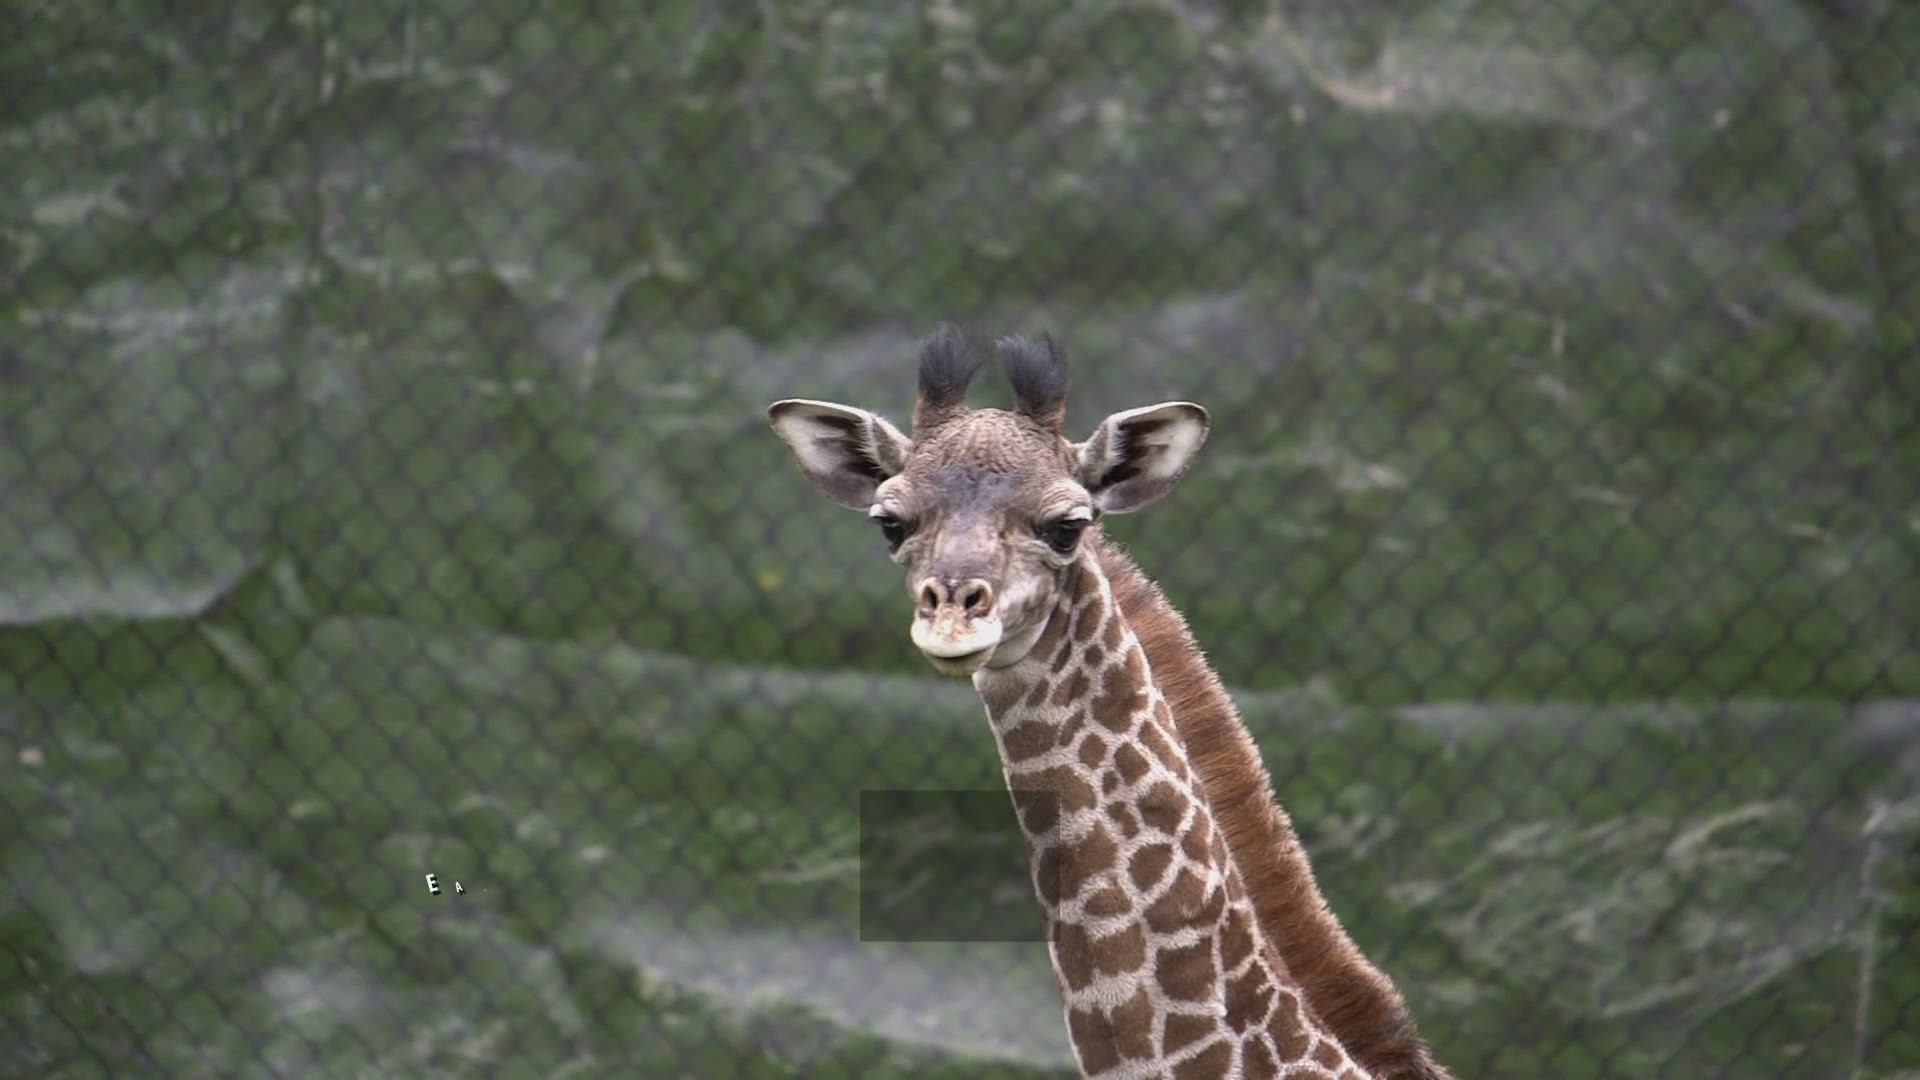 June 7, 2019: The newest giraffe born at the Cleveland Zoo on April 15 needs a name – and you can help choose it! Zoo officials announced a naming content in which guests can vote for one of these three options for the baby giraffe: Bomani: Warrior; Kidogo: Little; Mosi: Born first.